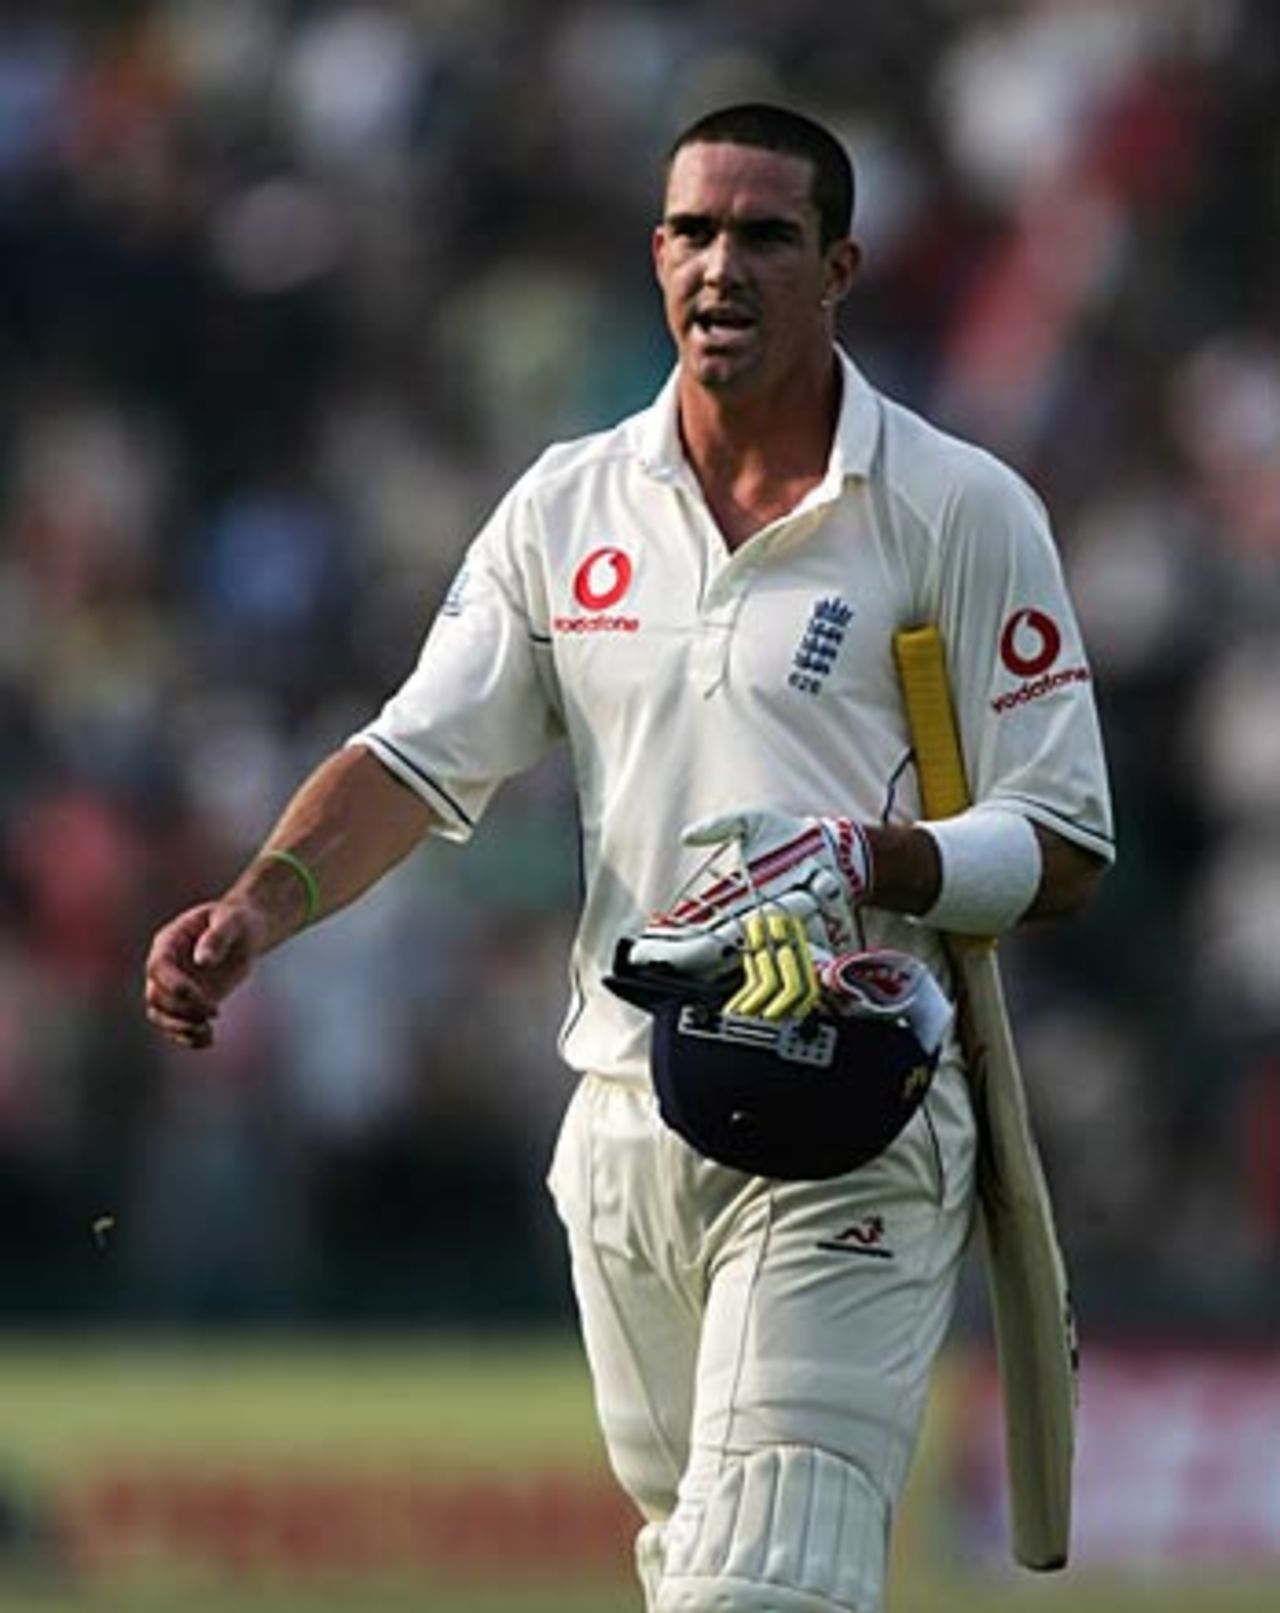 Kevin Pietersen after being given out caught off his arm, for a duck, against Harbhajan Singh, India v England, 2nd Test, Mohali, March 12, 2006